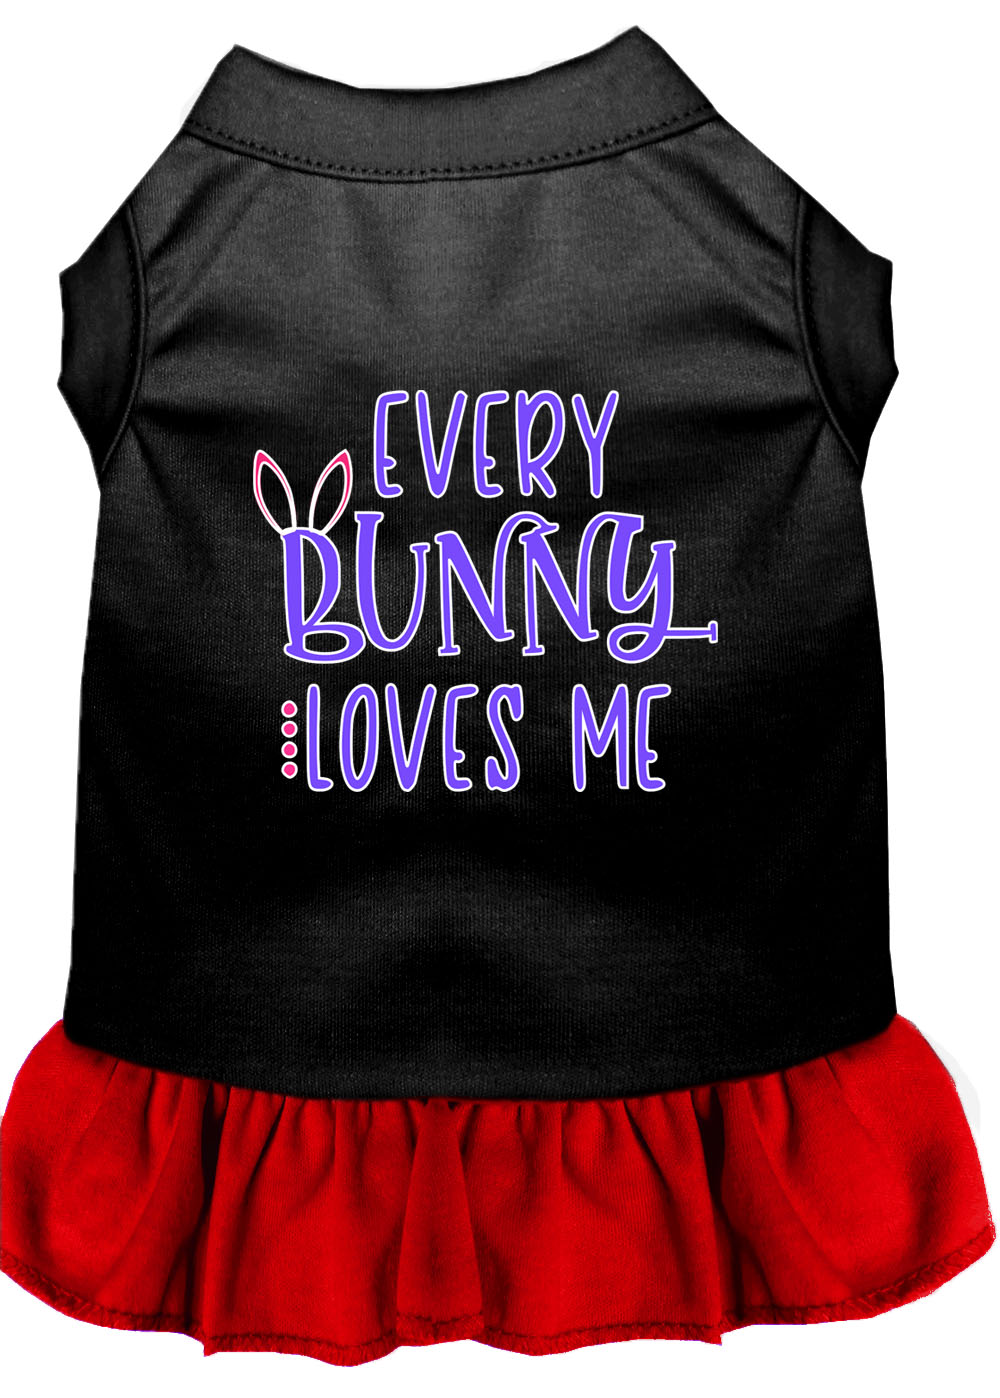 Every Bunny Loves me Screen Print Dog Dress Black with Red Sm